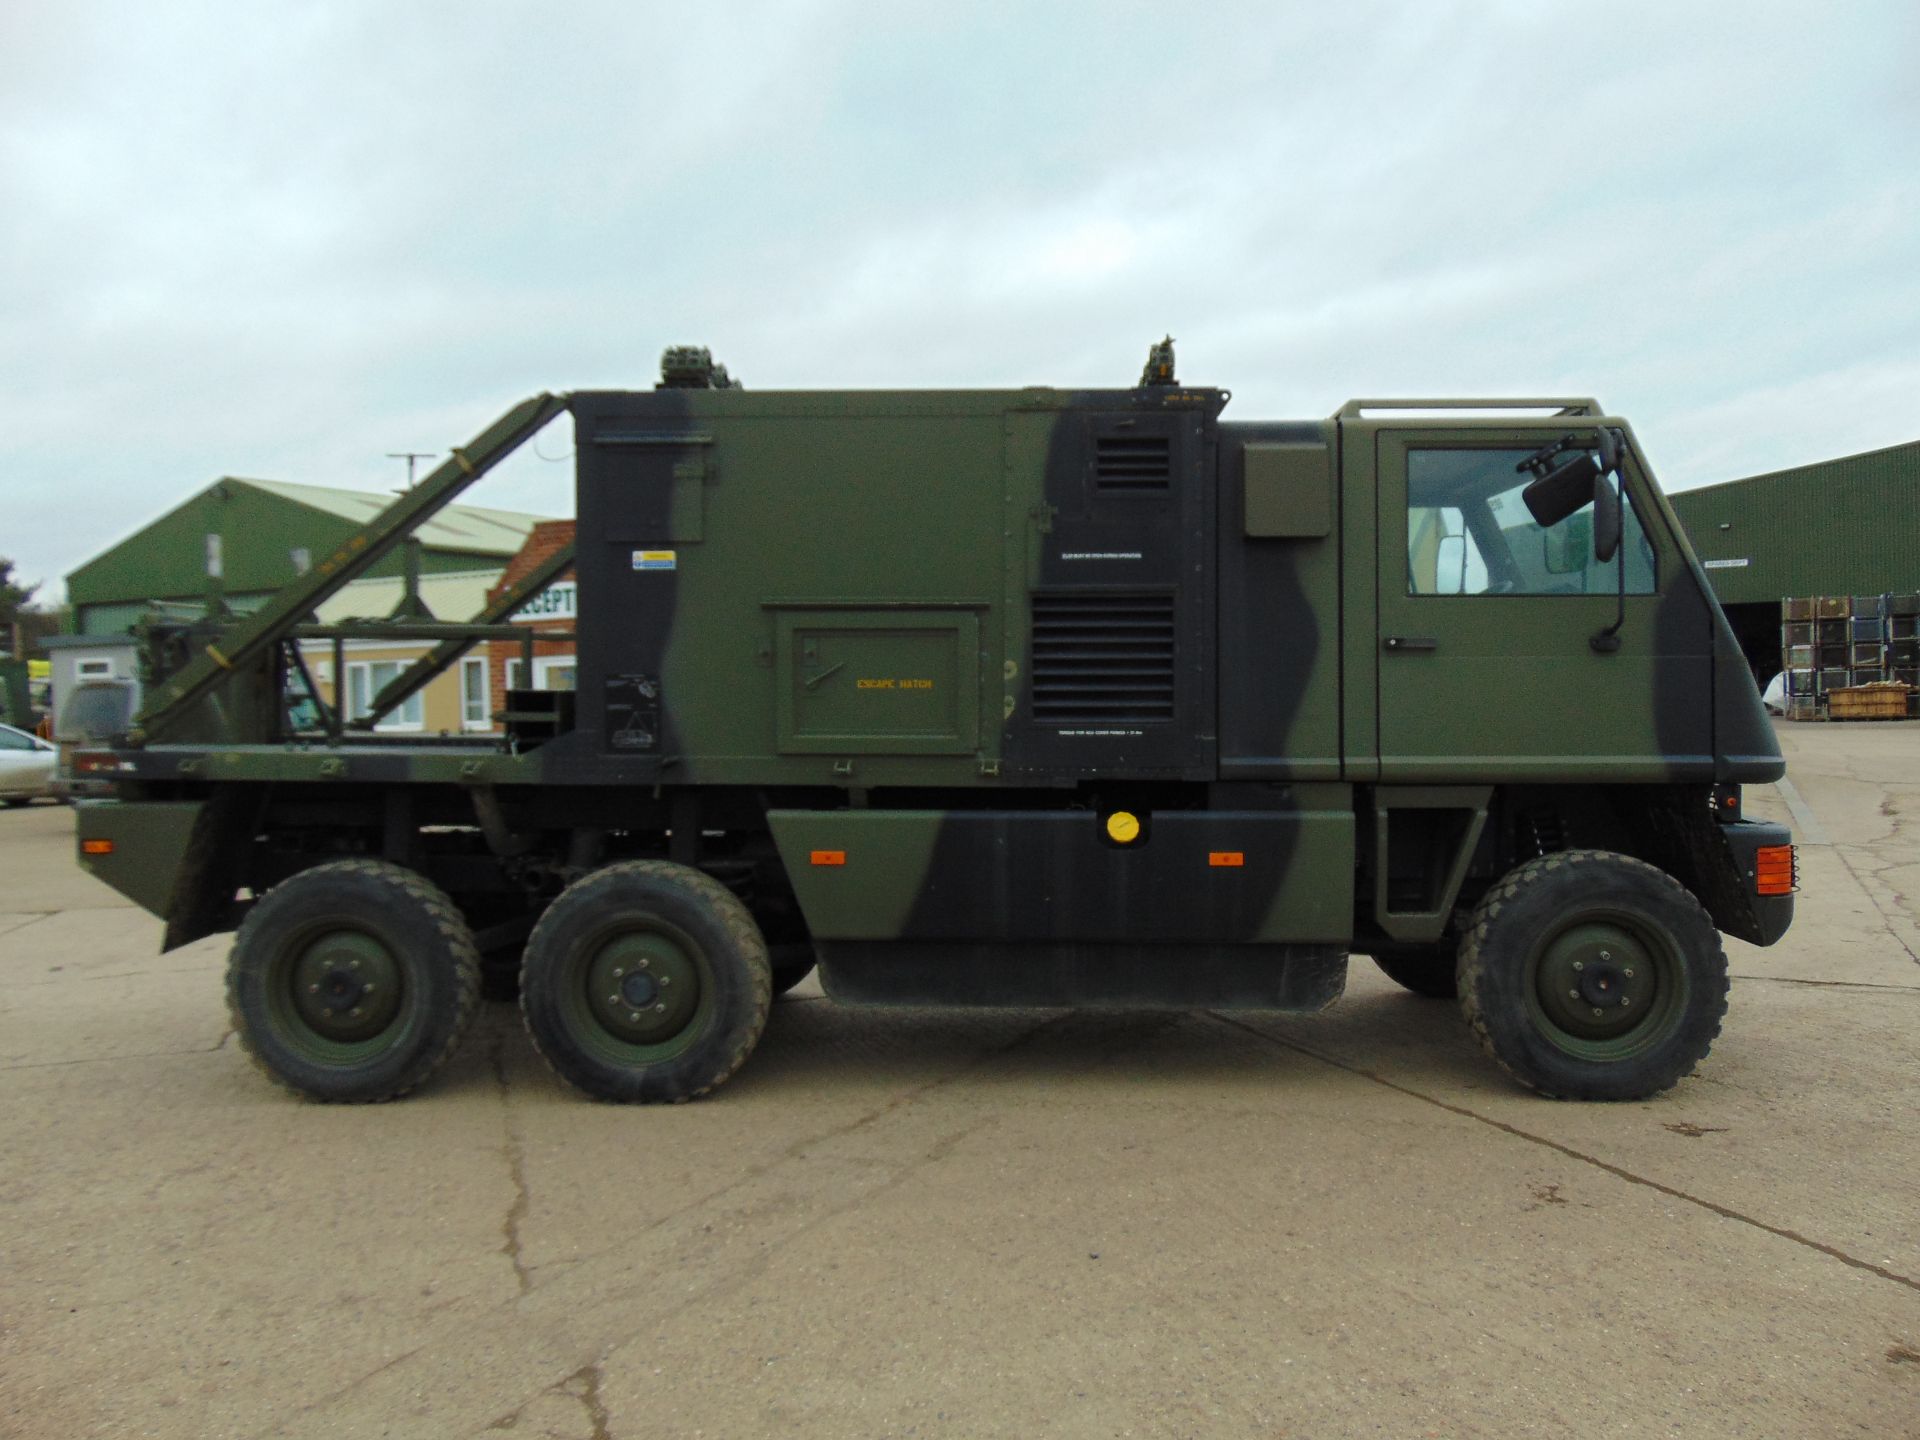 Ex Reserve Left Hand Drive Mowag Bucher Duro II 6x6 High-Mobility Tactical Vehicle - Image 5 of 14